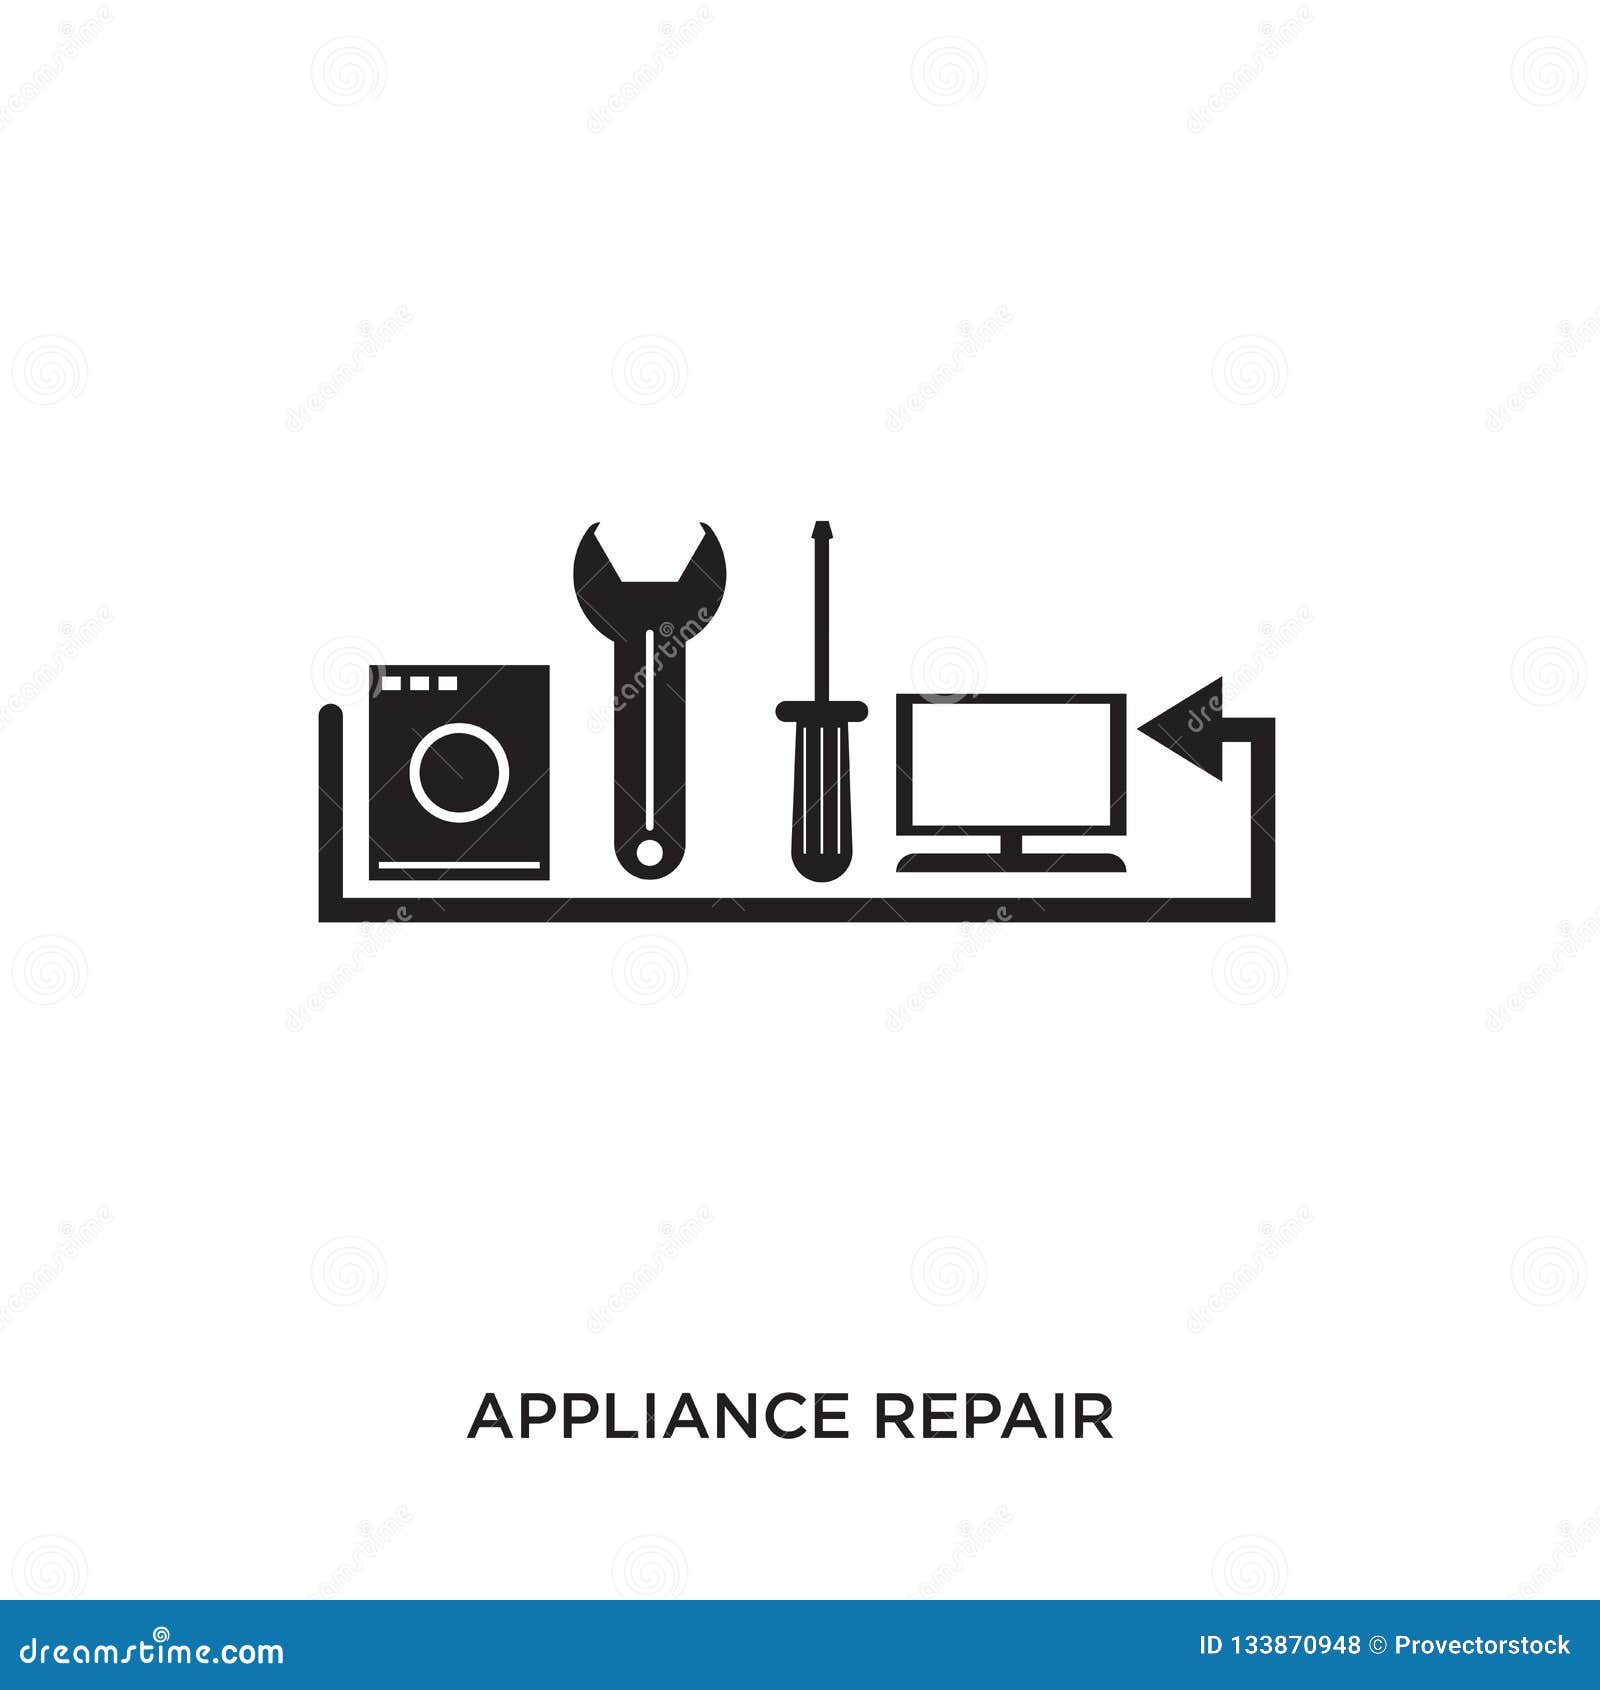 Top Rated Oro Valley Appliance Repair Dependable Refrigeration & Appliance Repair Service